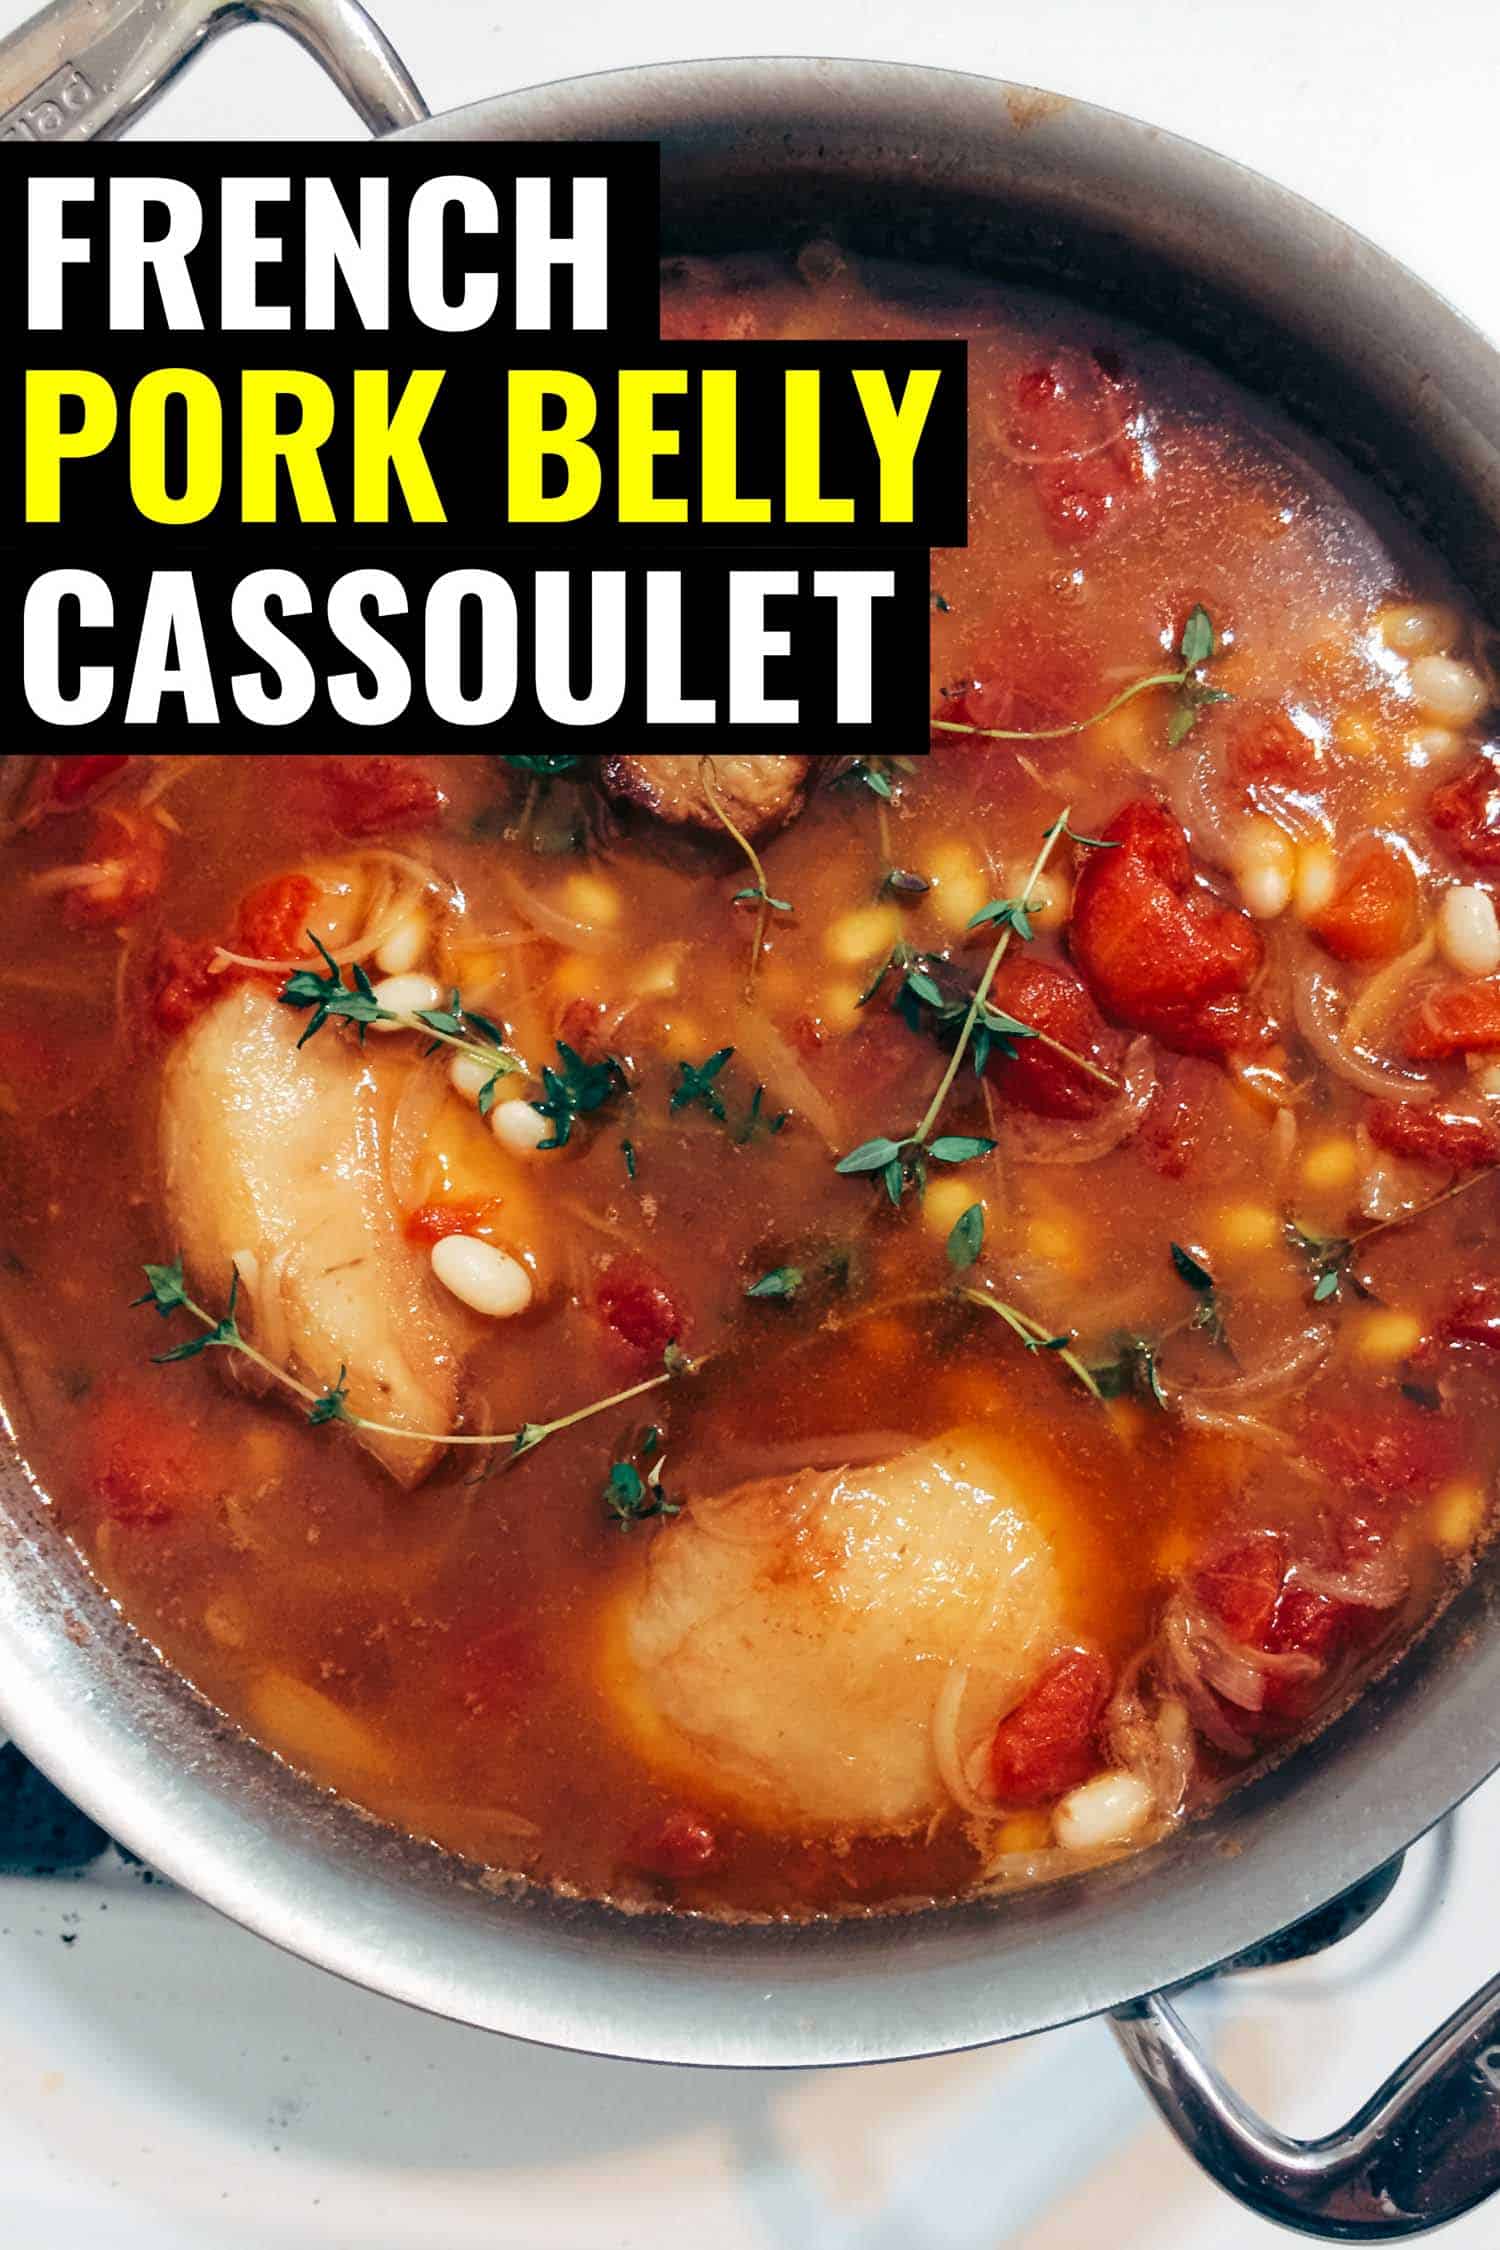 French cassoulet in a pot on the stove